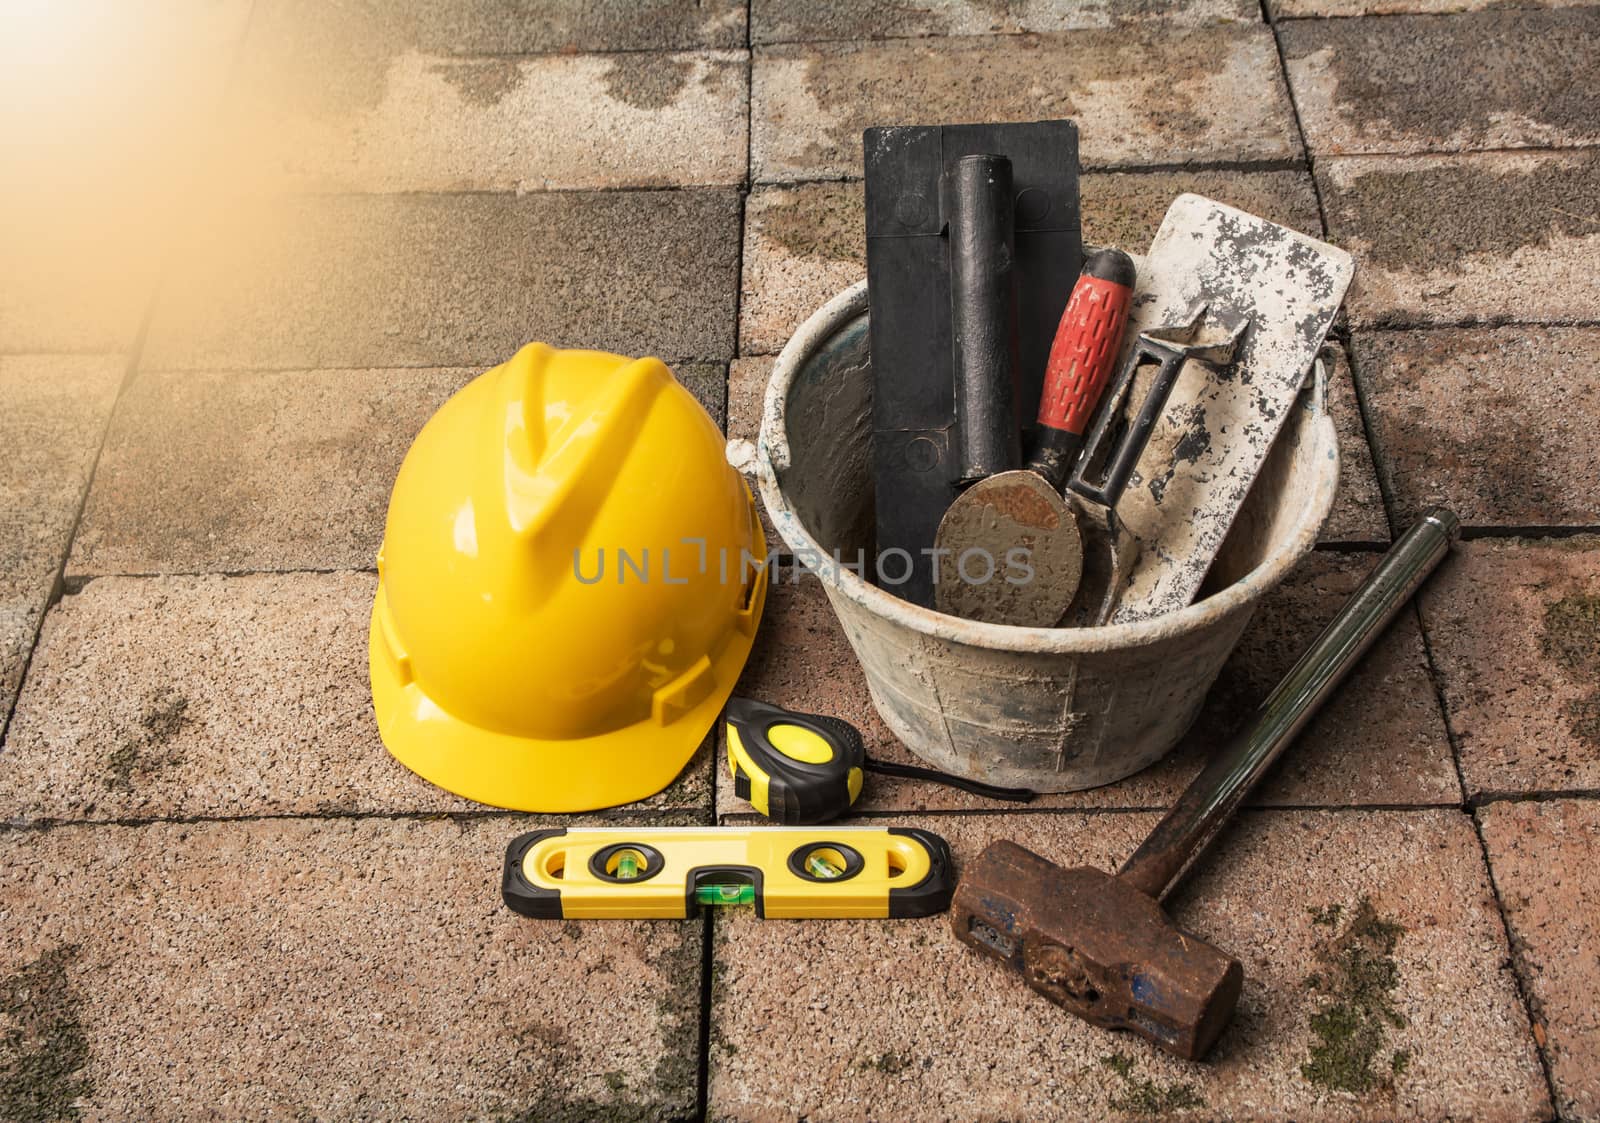 Construction tools or safety equipment with yellow helmet on brick ground